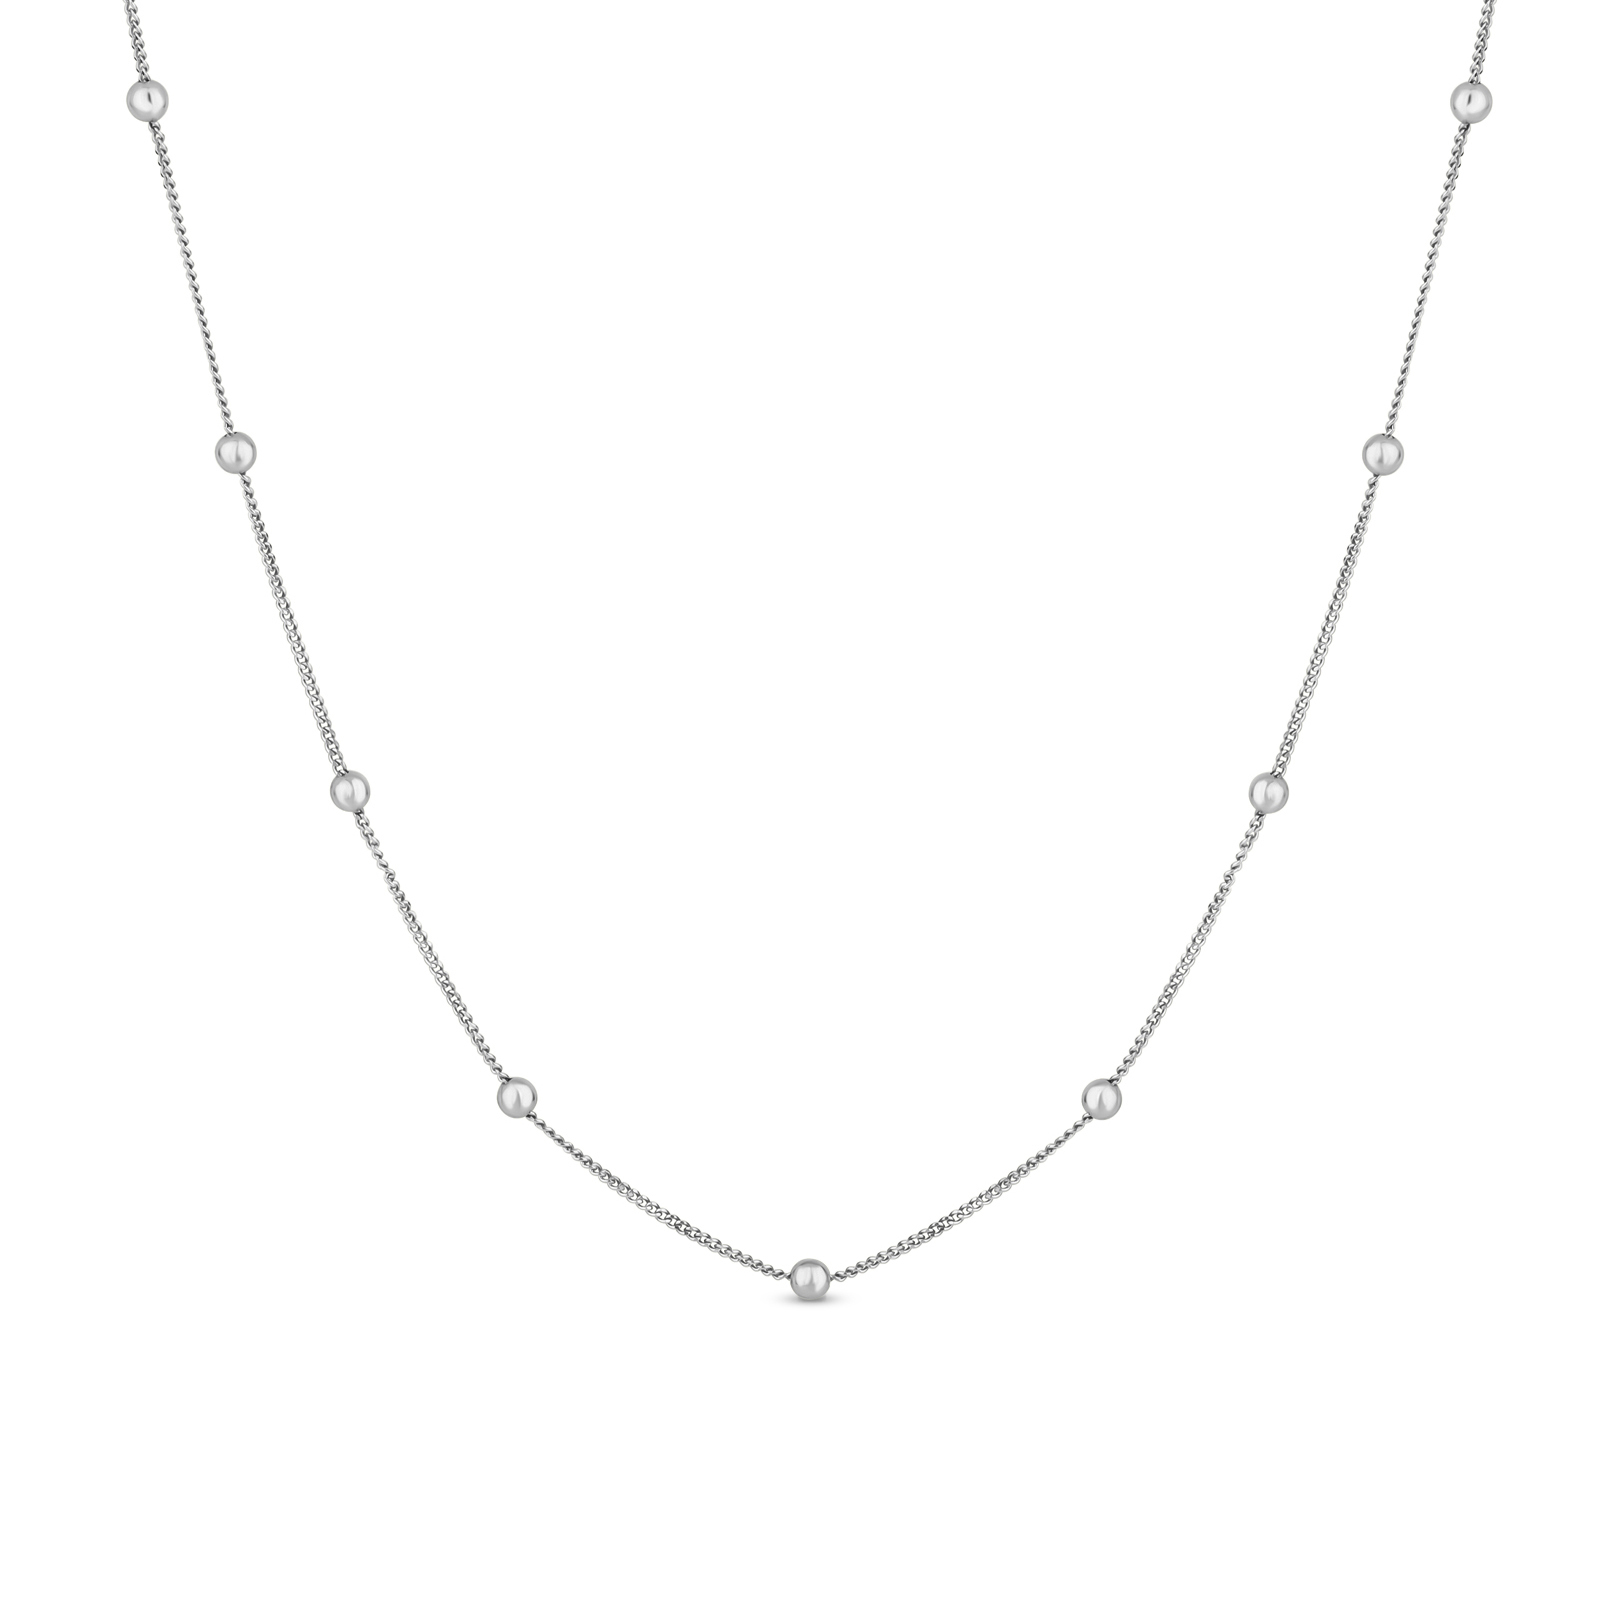 Sterling Silver Curb 2.5mm Beads 18 Inch Chain